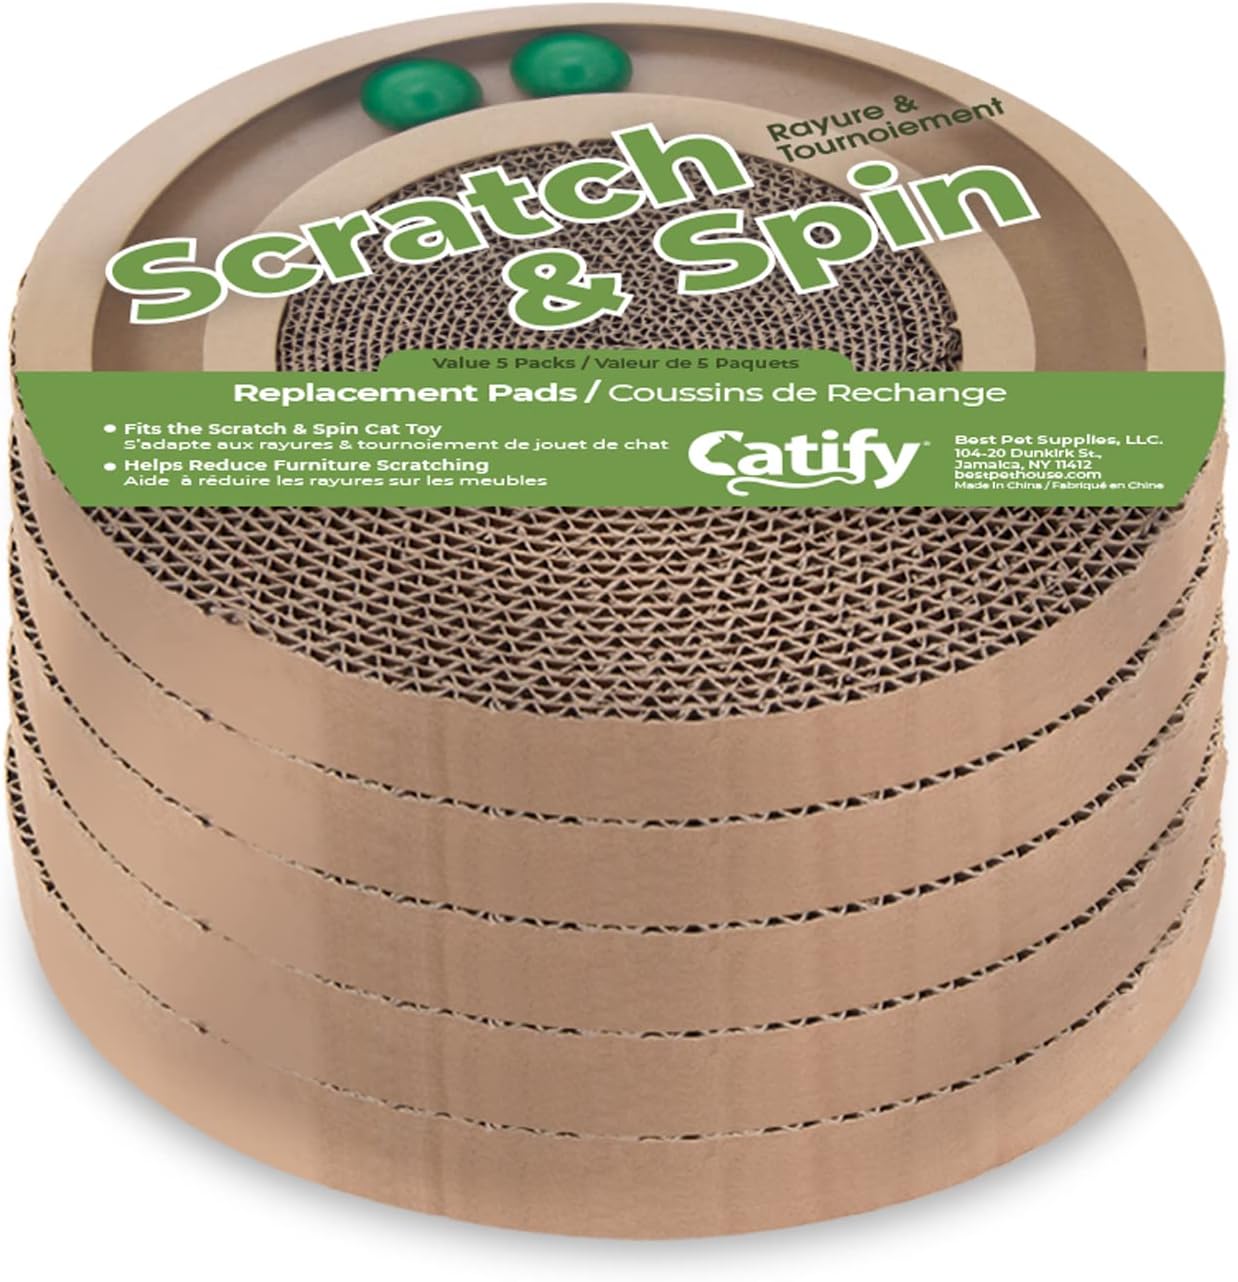 Best Pet Supplies Scratch and Spin Cat Scratcher Replacement Pads for Active Play, Natural Recycled Corrugated Cardboard, Supports Pet Behaviors, Relieves